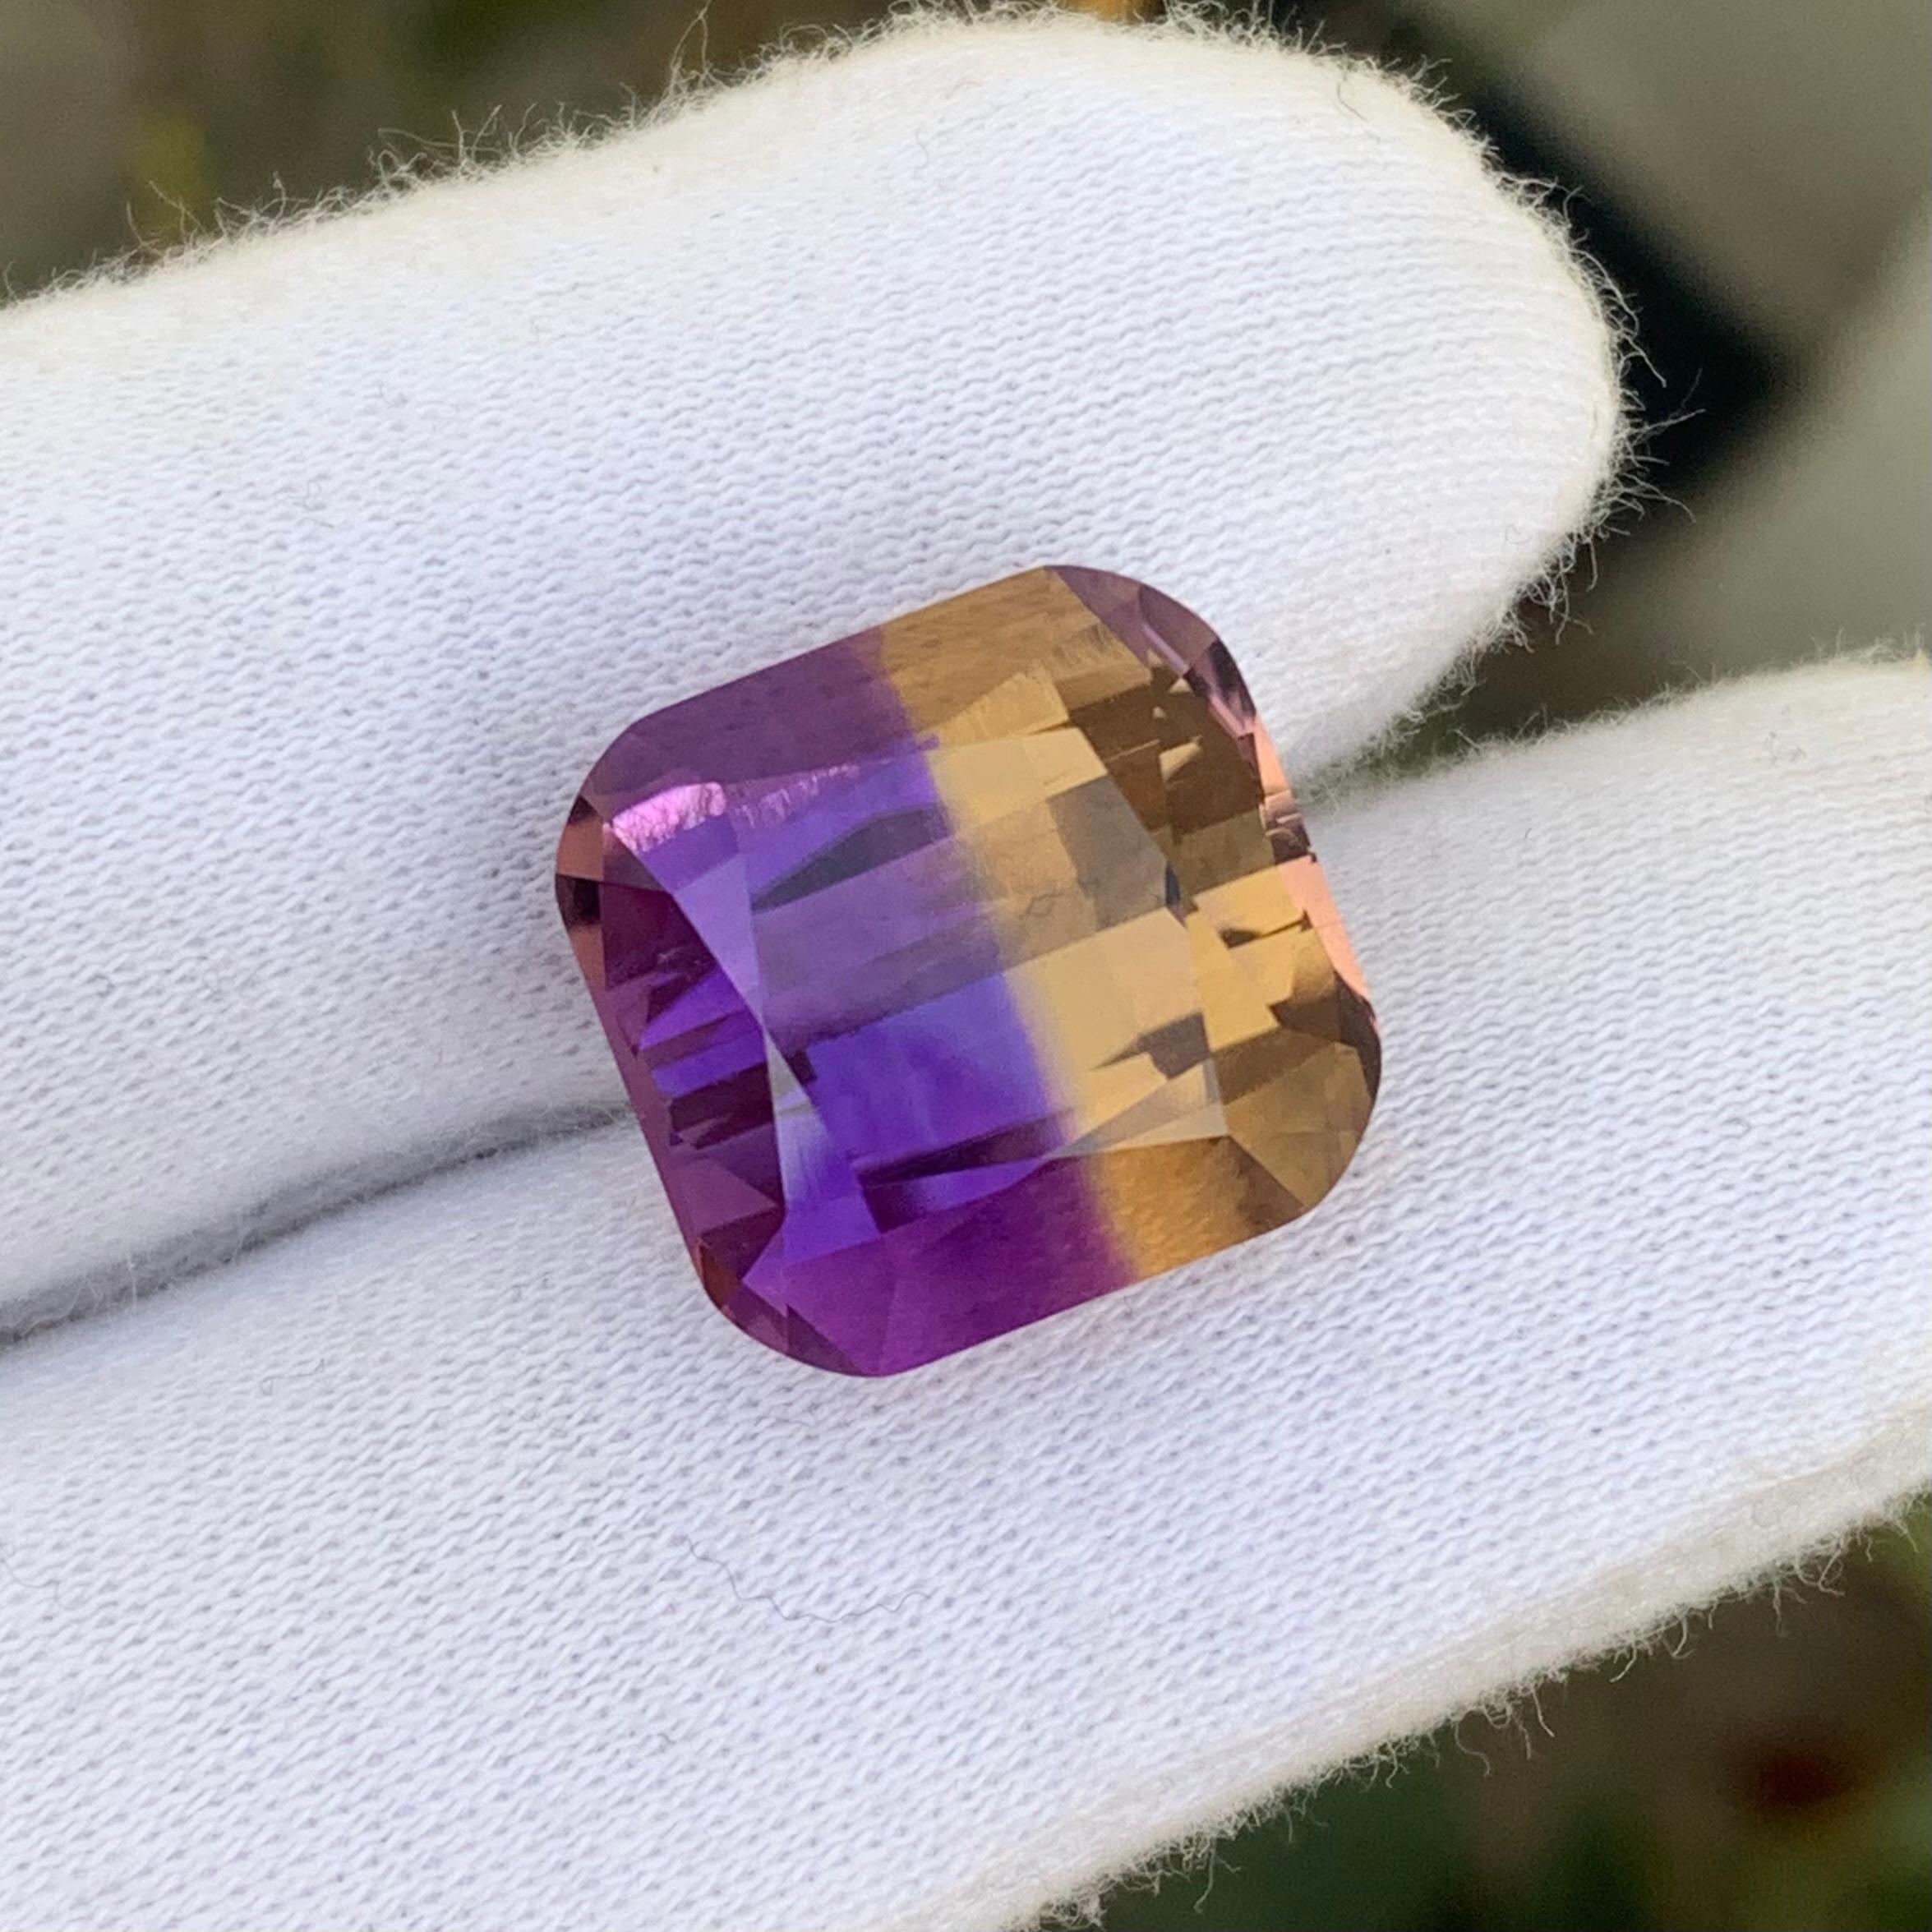 Cushion Cut Gorgeous 14.25 Carat Loose Ametrine from Bolivia For Sale